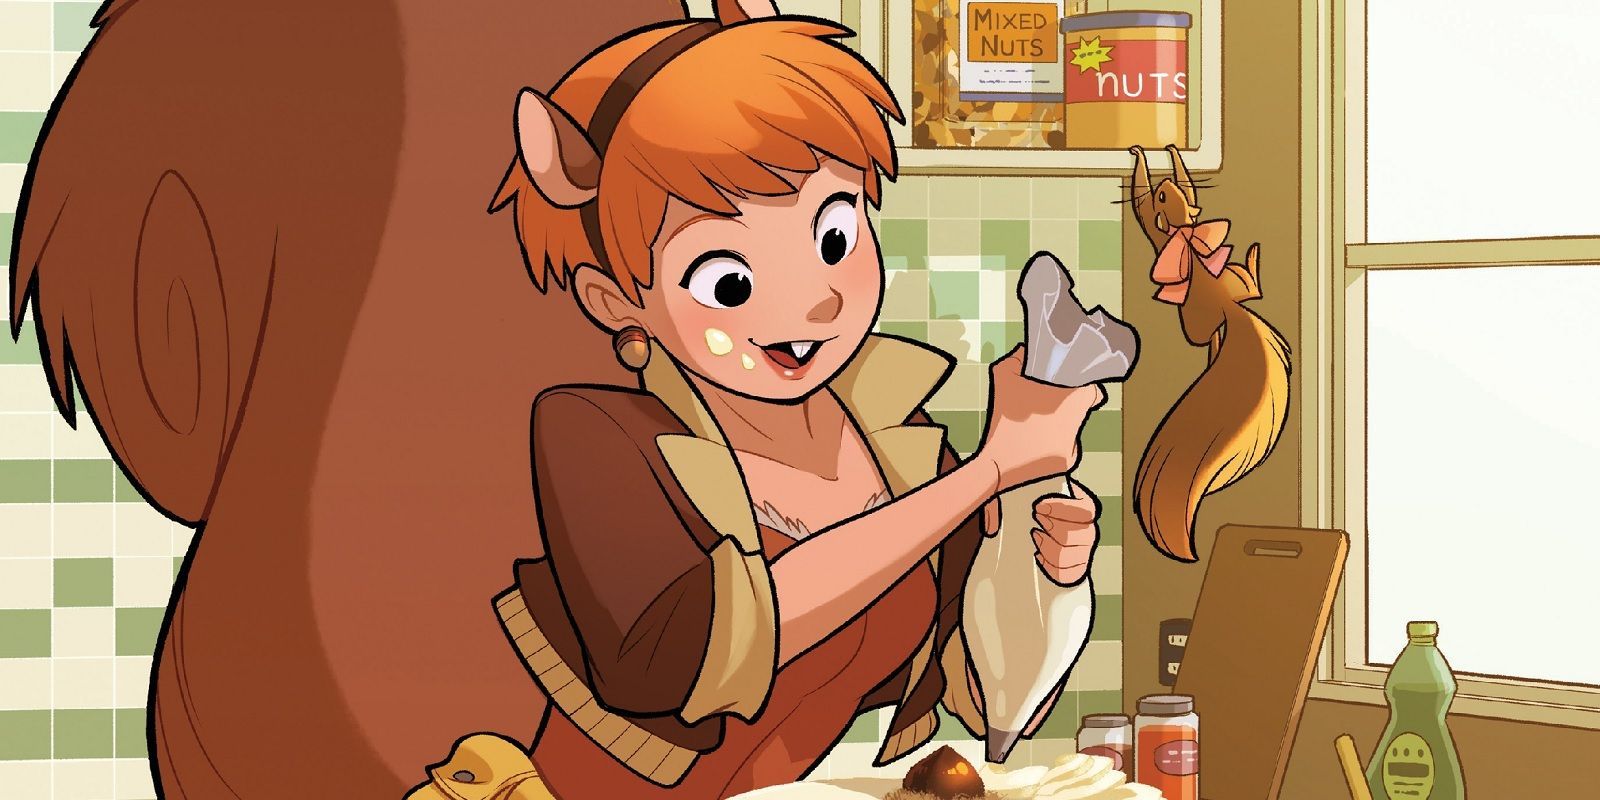 Squirrel Girl as she appeared in Marvel Comics